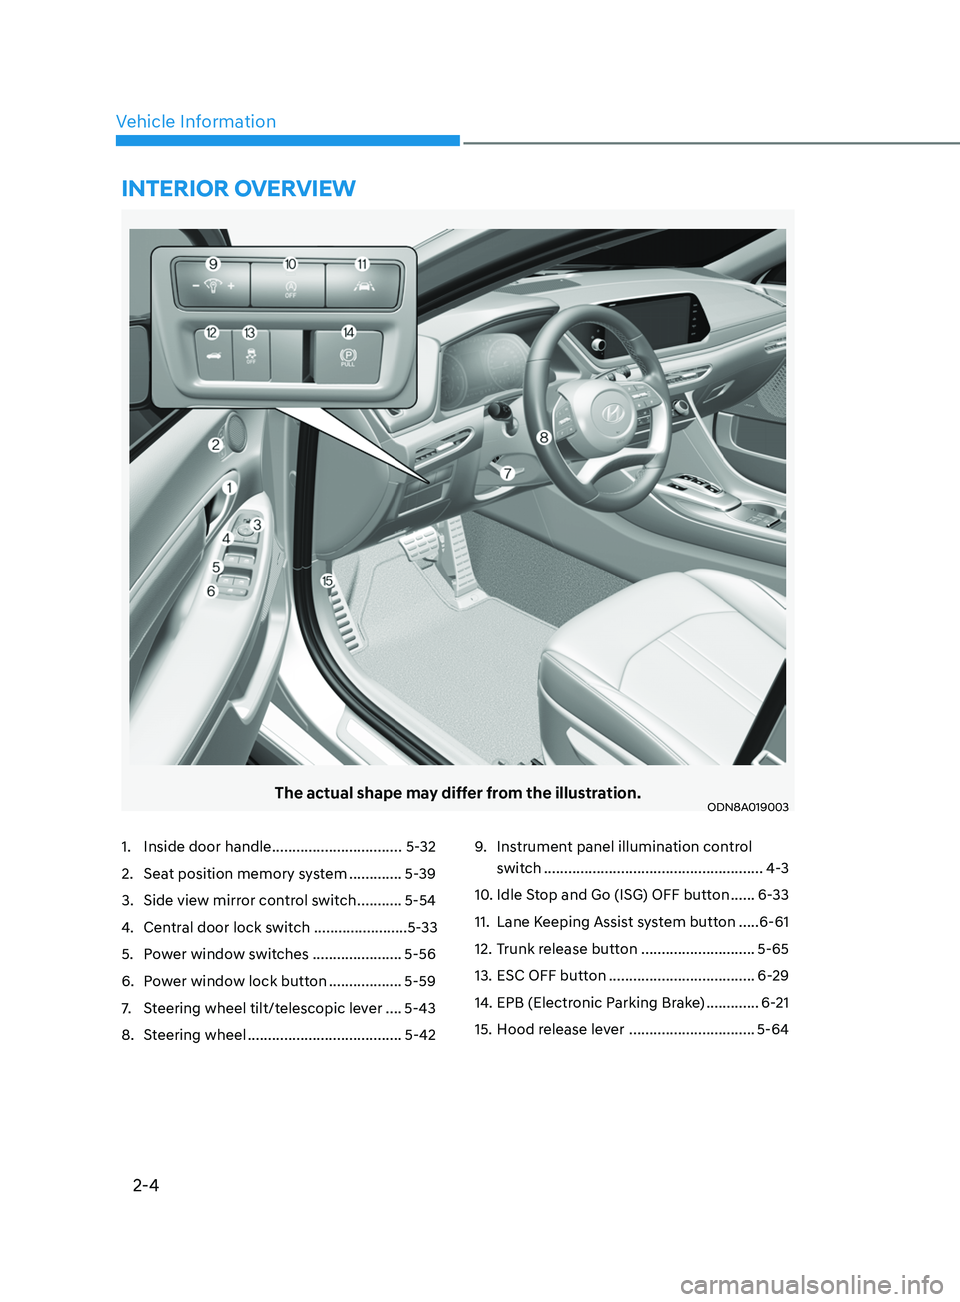 HYUNDAI SONATA 2022  Owners Manual 2-4
Vehicle Information
The actual shape may differ from the illustration.ODN8A019003
1. Inside door handle  ................................ 5-32
2.  
Sea
 t position memory system   .............5-3